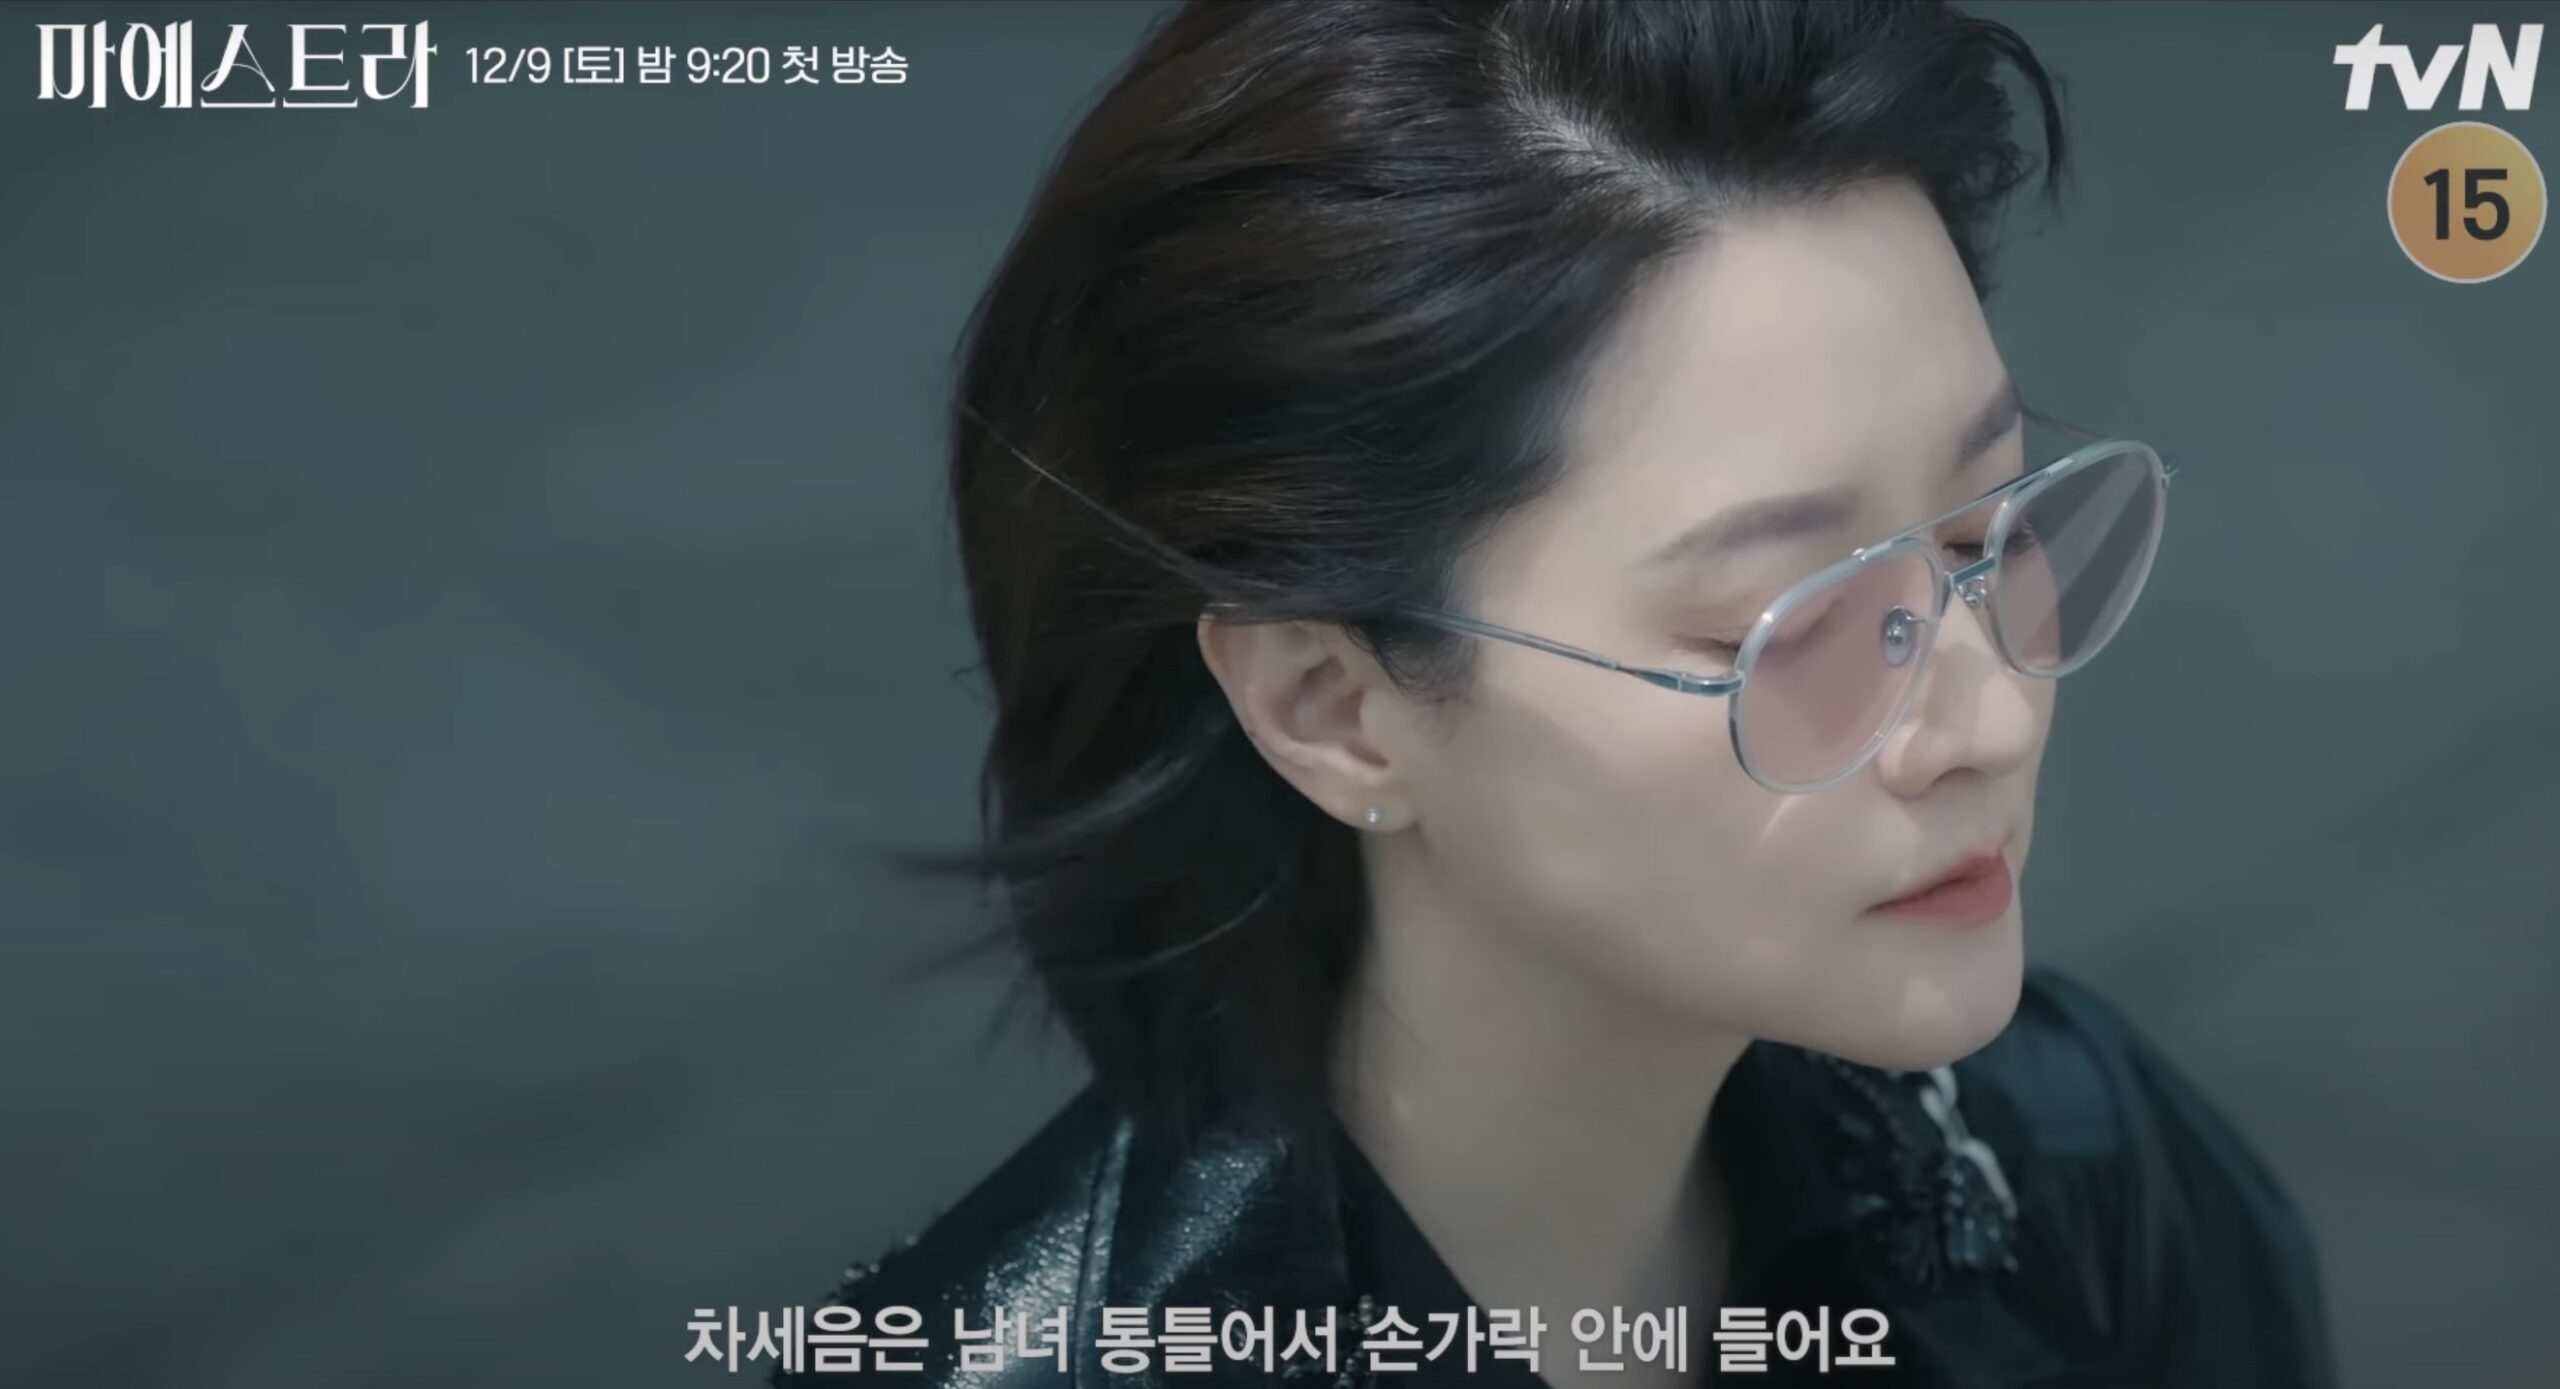 Lee Young-ae is ready to declare war in new teaser